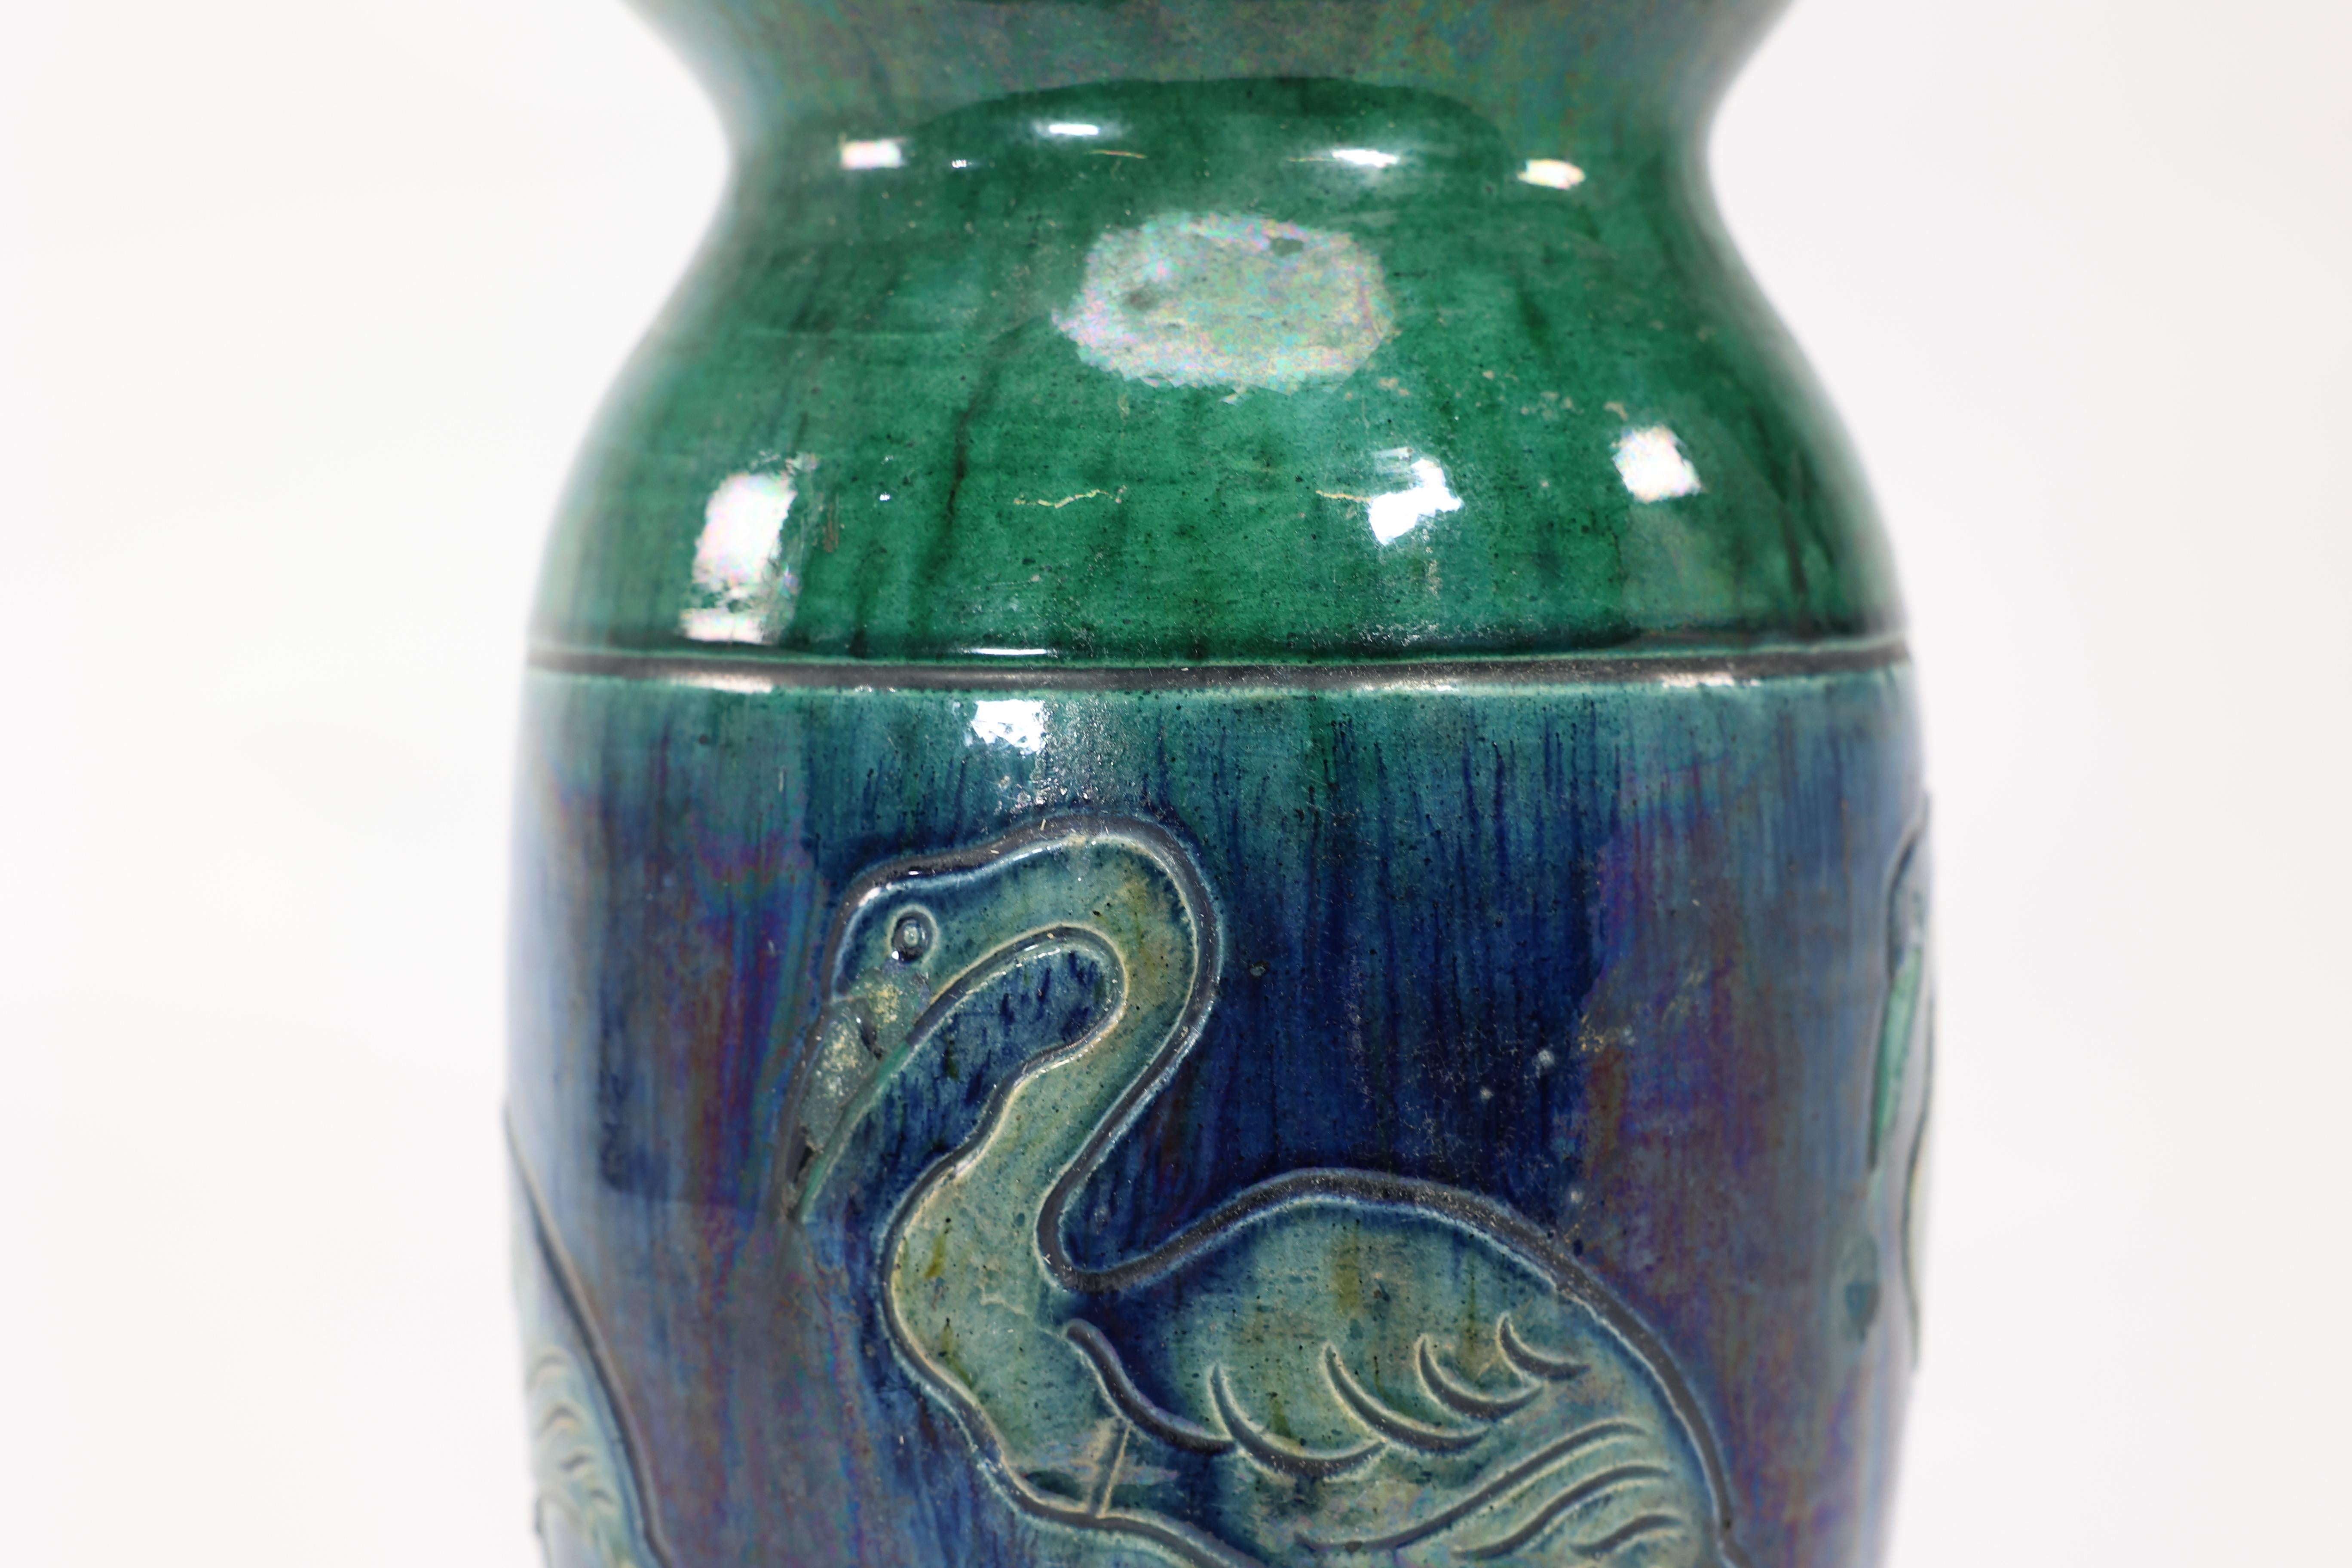 Early 20th Century Belgium Art Pottery. Tall ceramic Arts & Crafts vase decorated with 5 Flamingos. For Sale